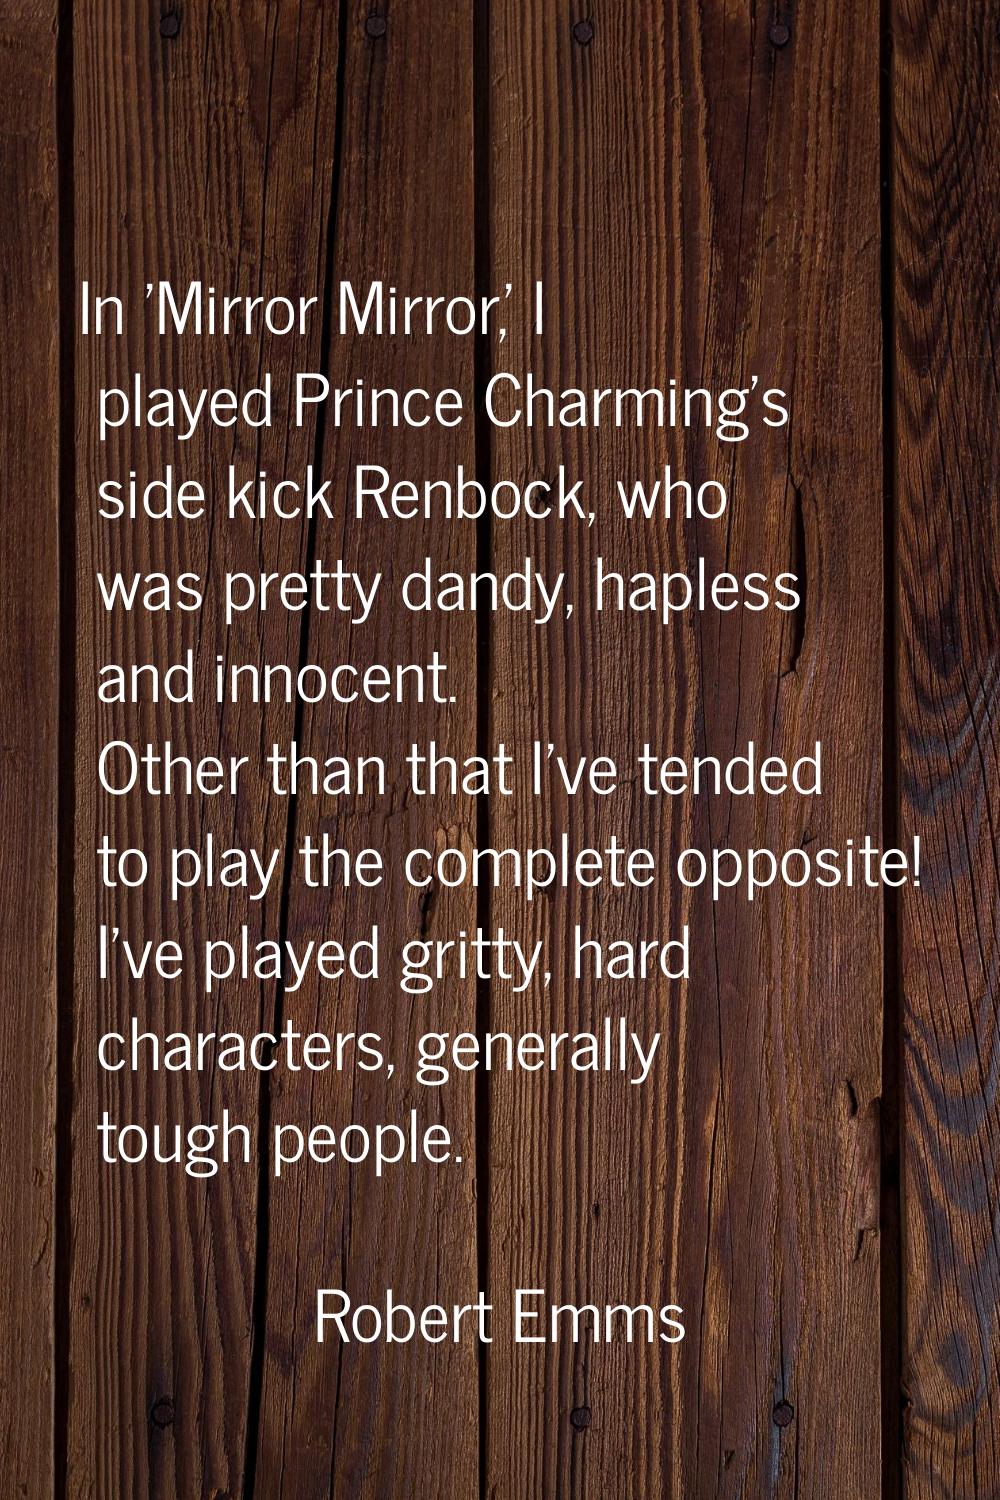 In 'Mirror Mirror,' I played Prince Charming's side kick Renbock, who was pretty dandy, hapless and